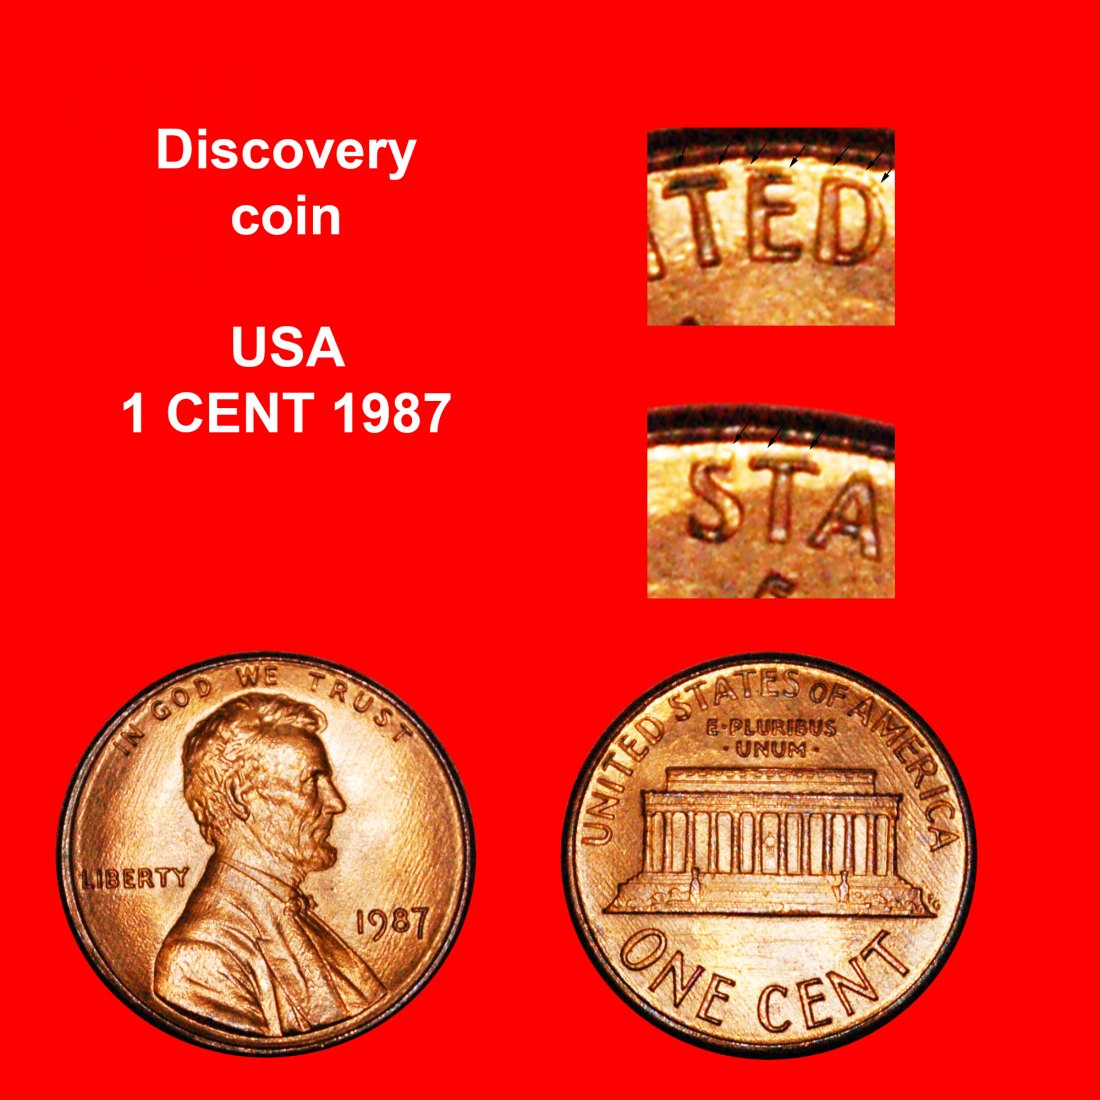  * MEMORIAL 1982-2008: USA★1 CENT 1987 UNC MINT LUSTRE DISCOVERY UNPUBLISHED★LOW START! ★ NO RESERVE!   